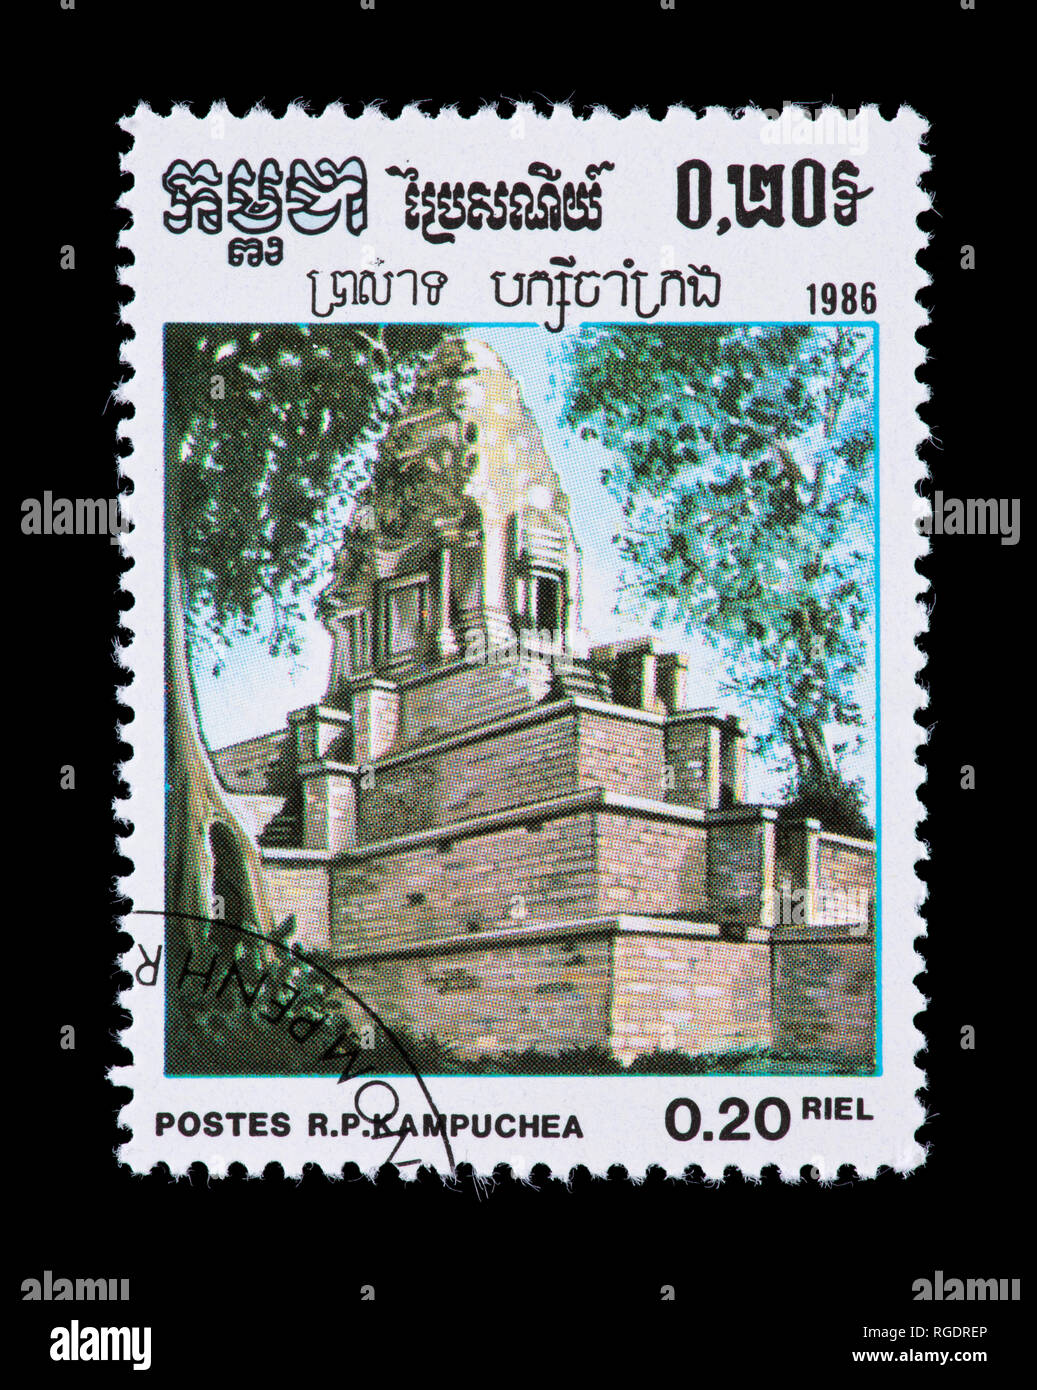 Postage stamp from Cambodia (Kampuchea) depicting a temple, issued for Khmer culture. Stock Photo